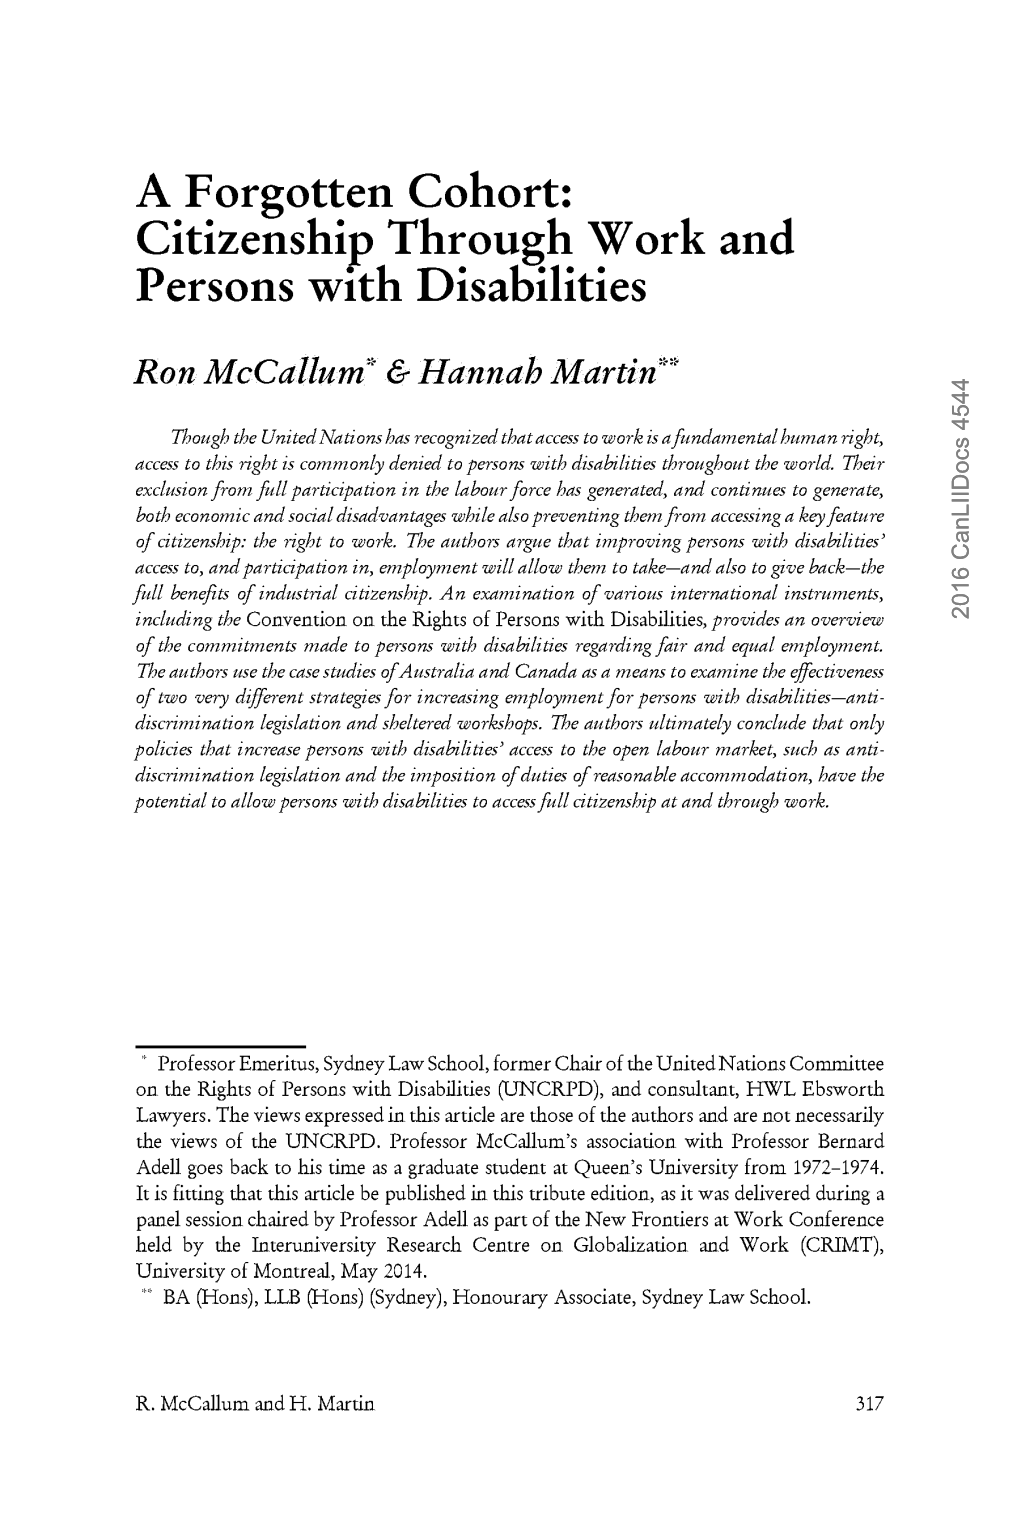 A Forgotten Cohort: Citizenship Through Work and Persons with Disabilities